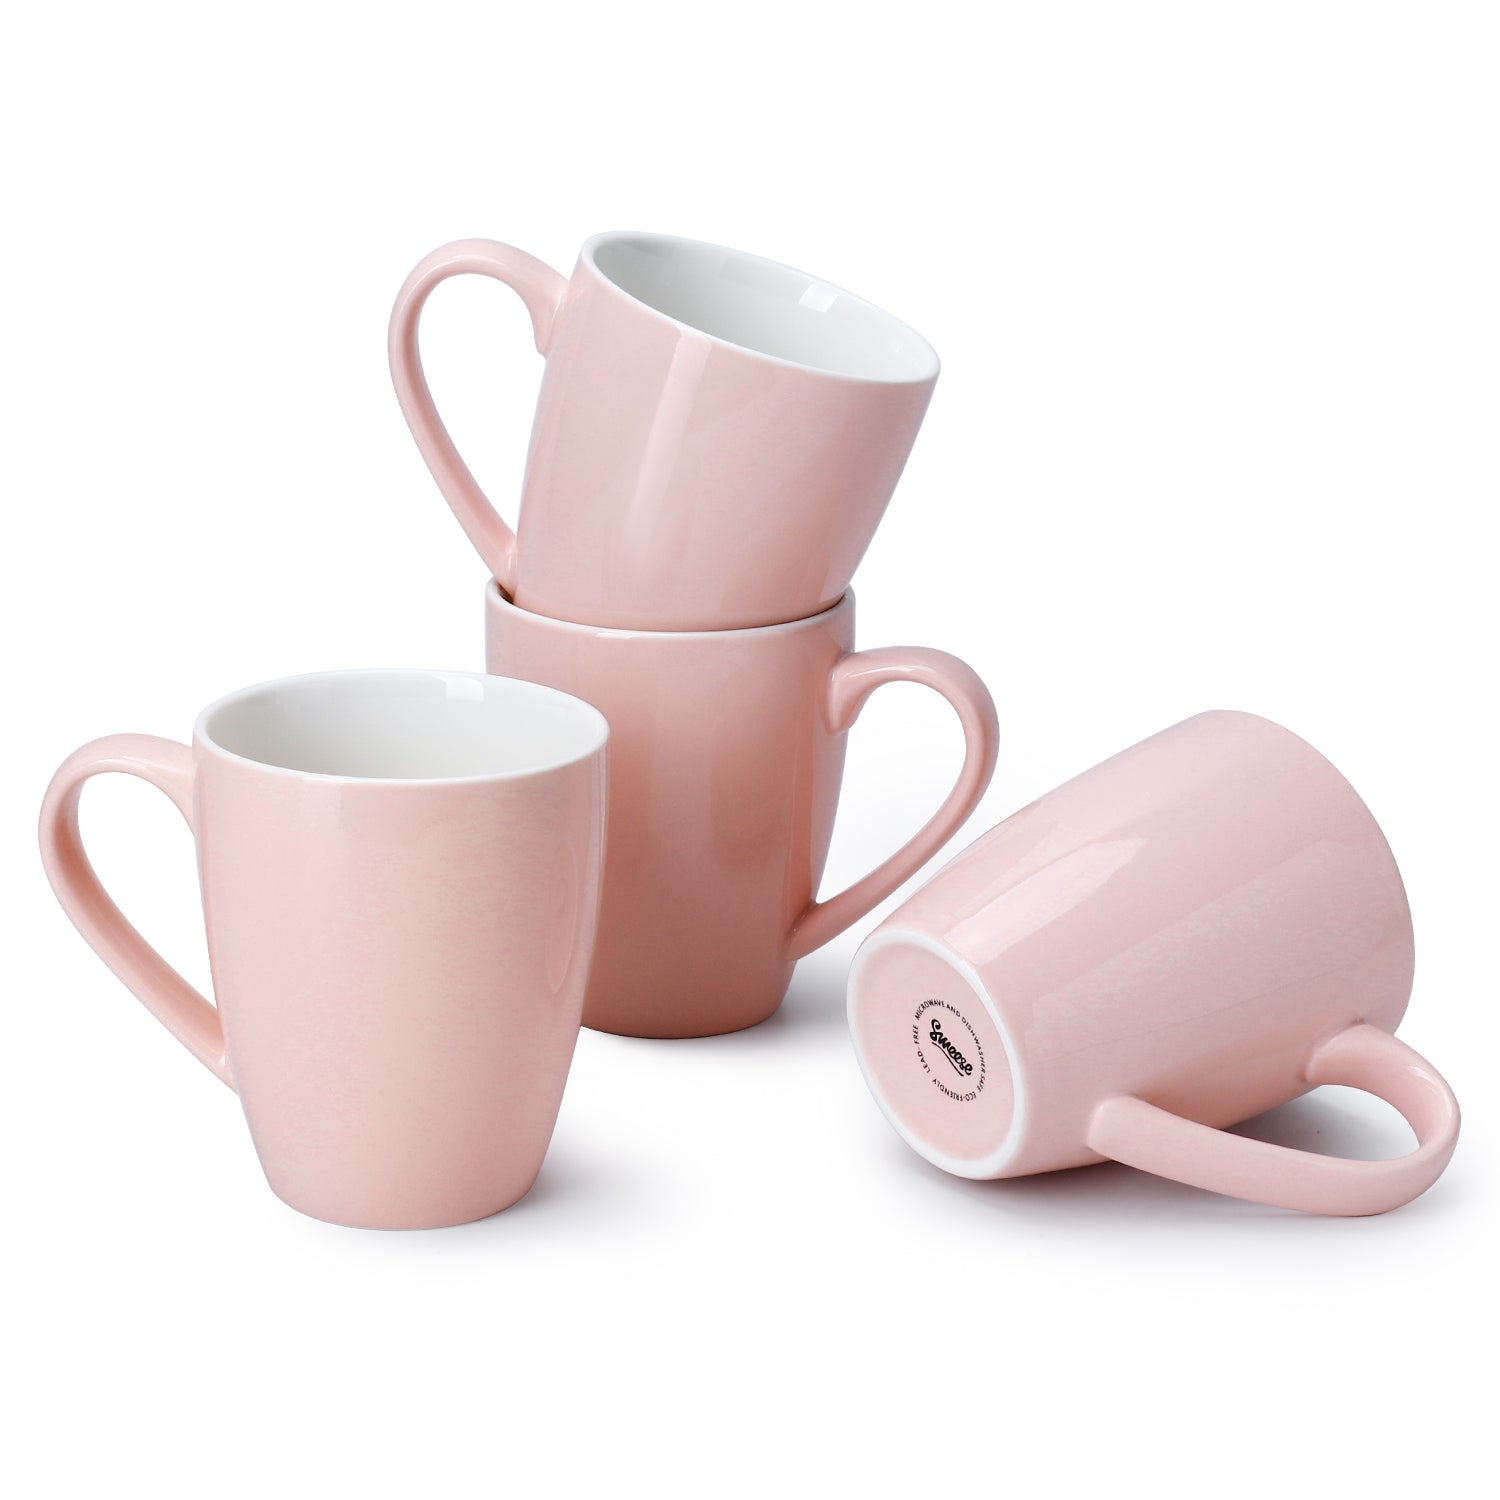 Sweese 601.414 Porcelain Mugs - 16 Ounce (Top to the Rim) for